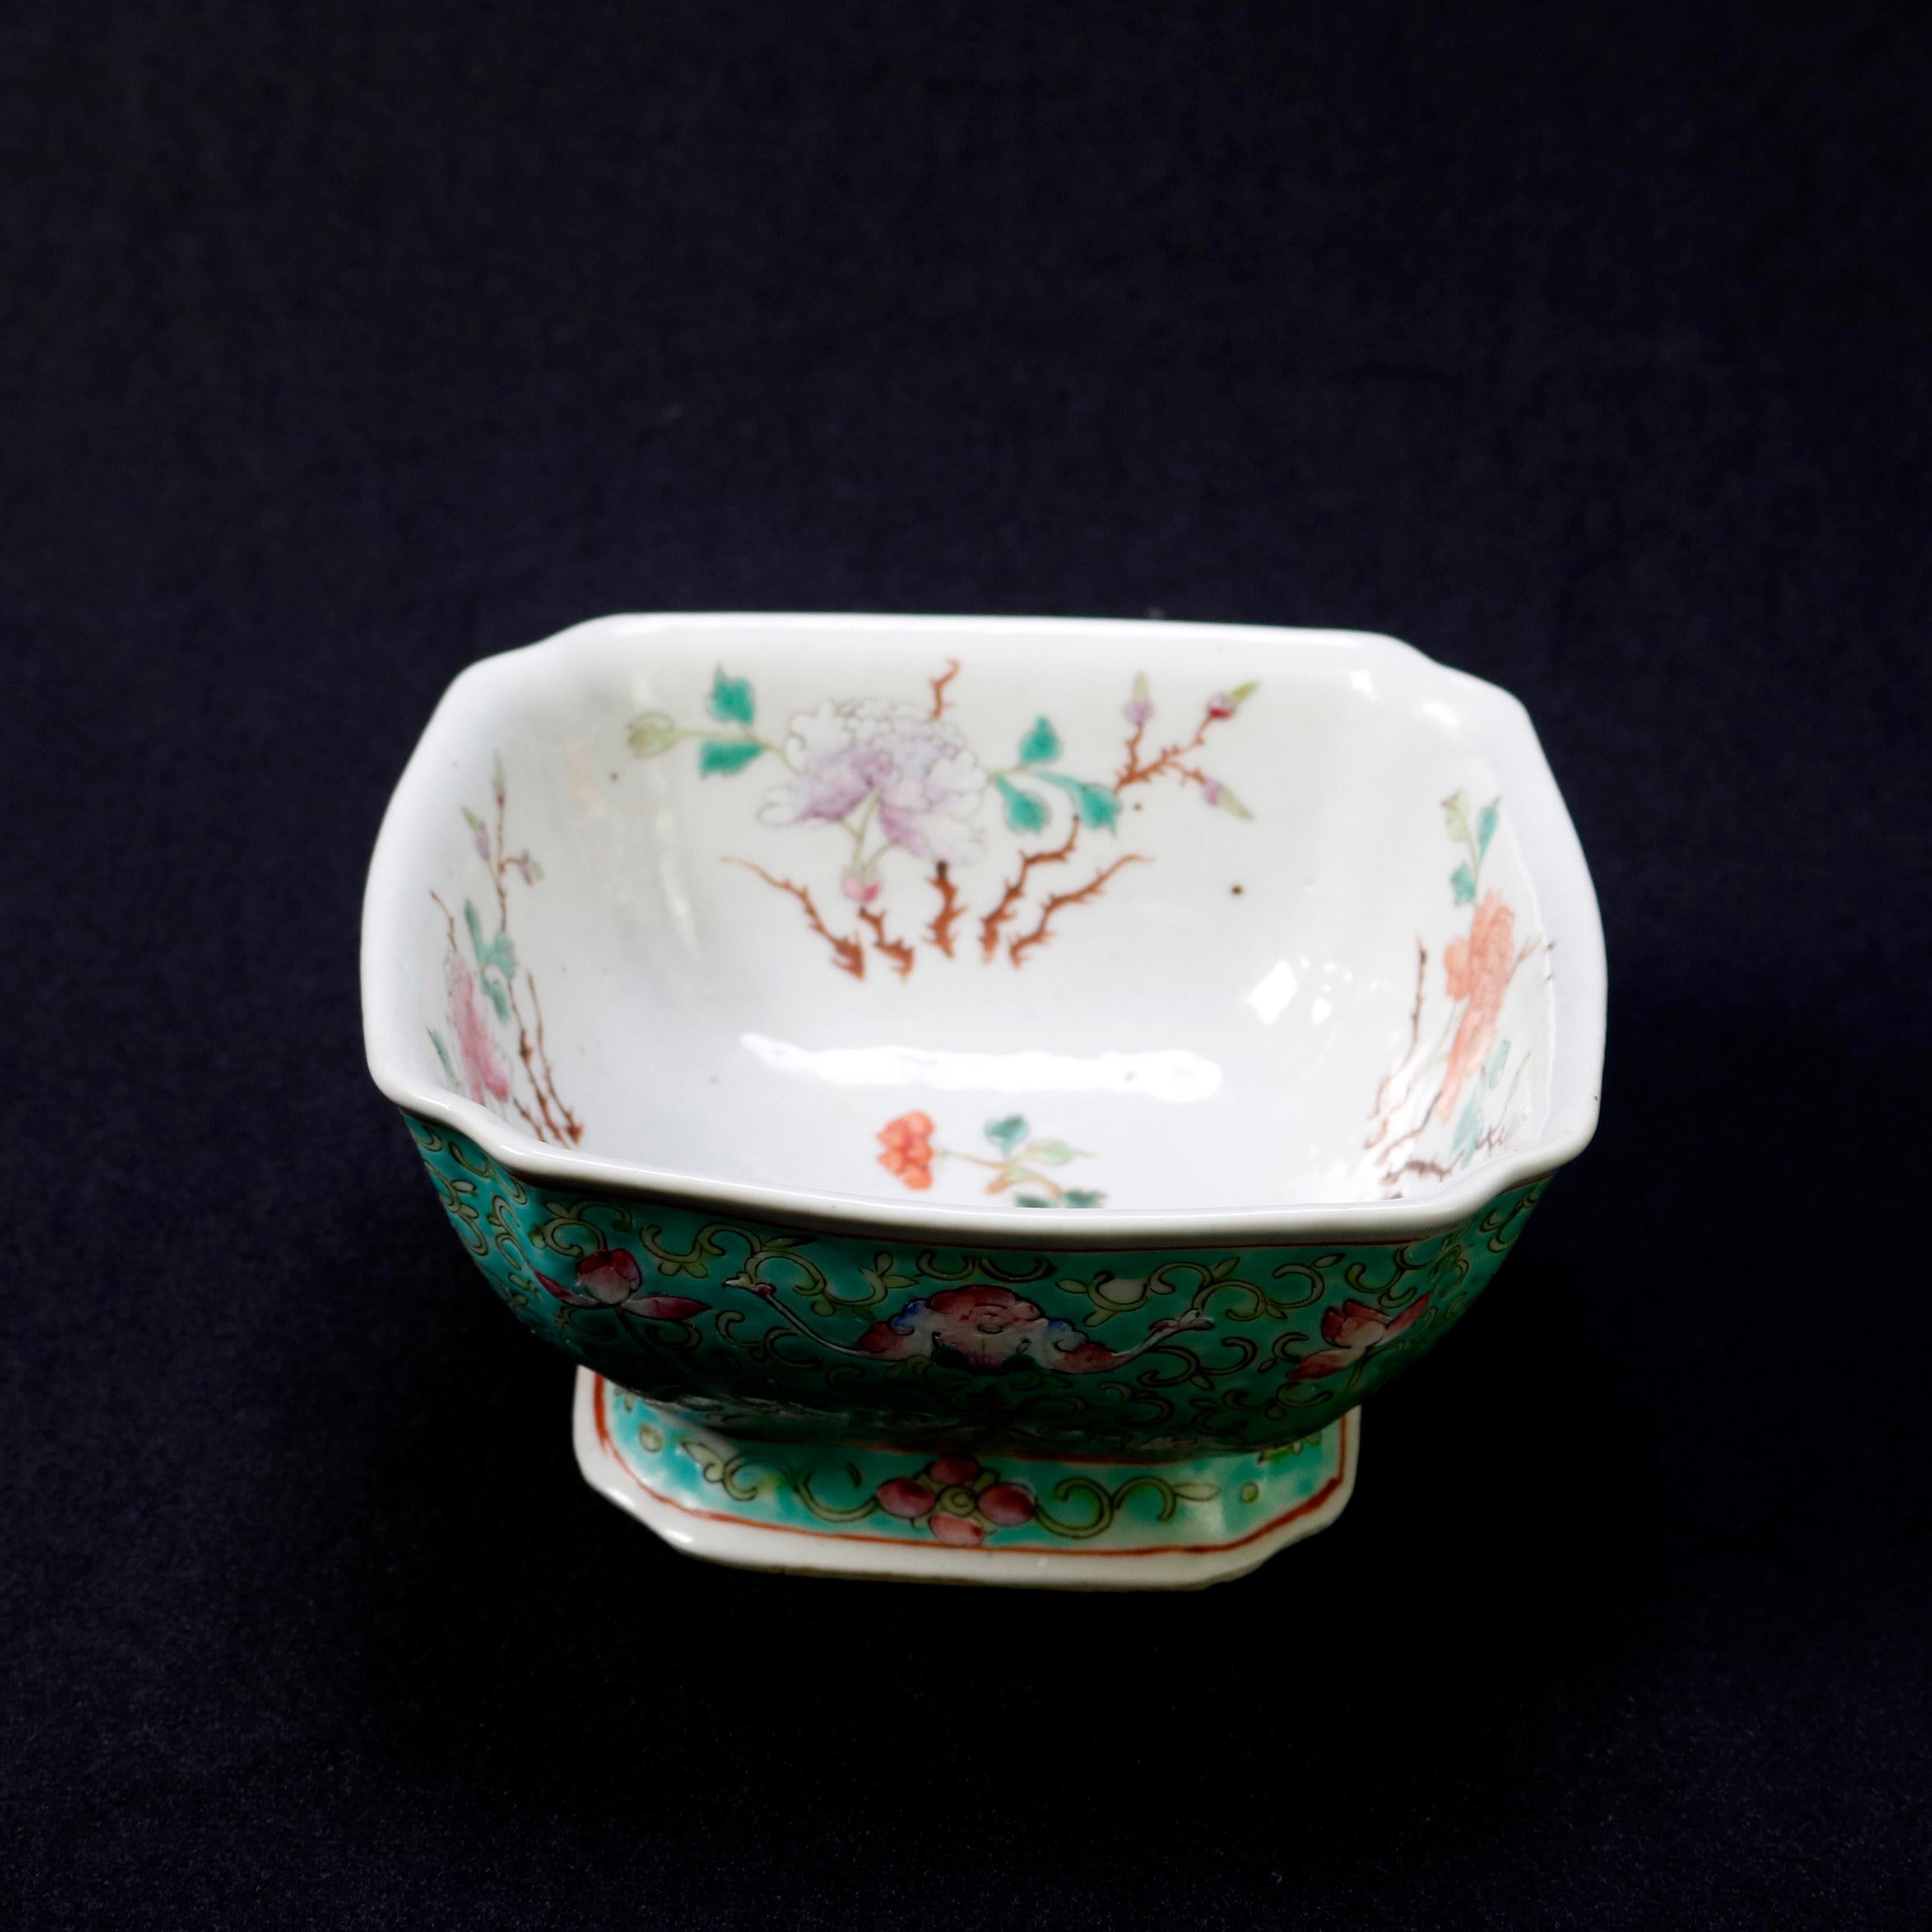 Ceramic Antique Chinese Hand Painted Floral Celedon Decorated Bowl, Signed, 19th Century